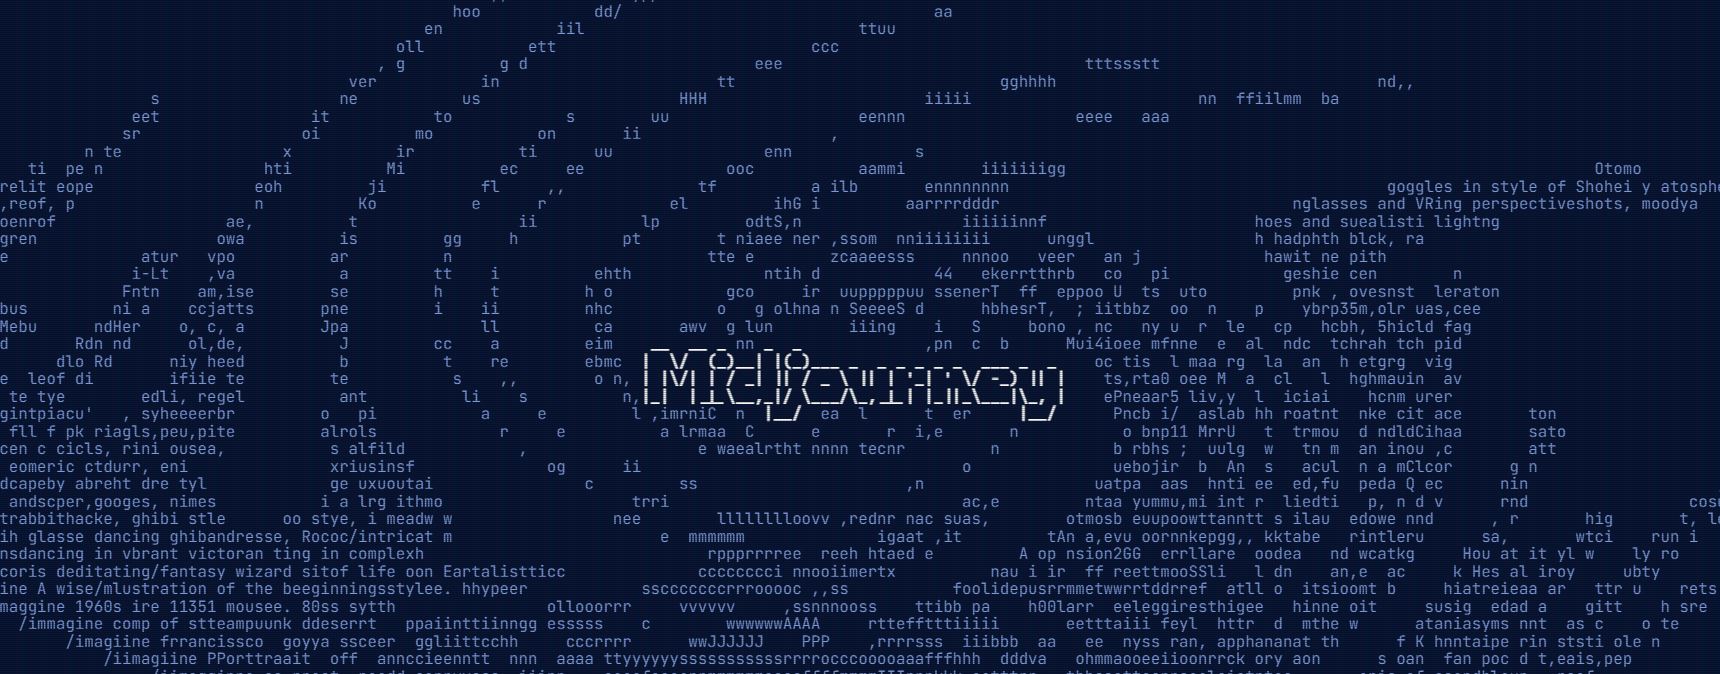 How to Use Midjourney: A Clear and Confident Guide